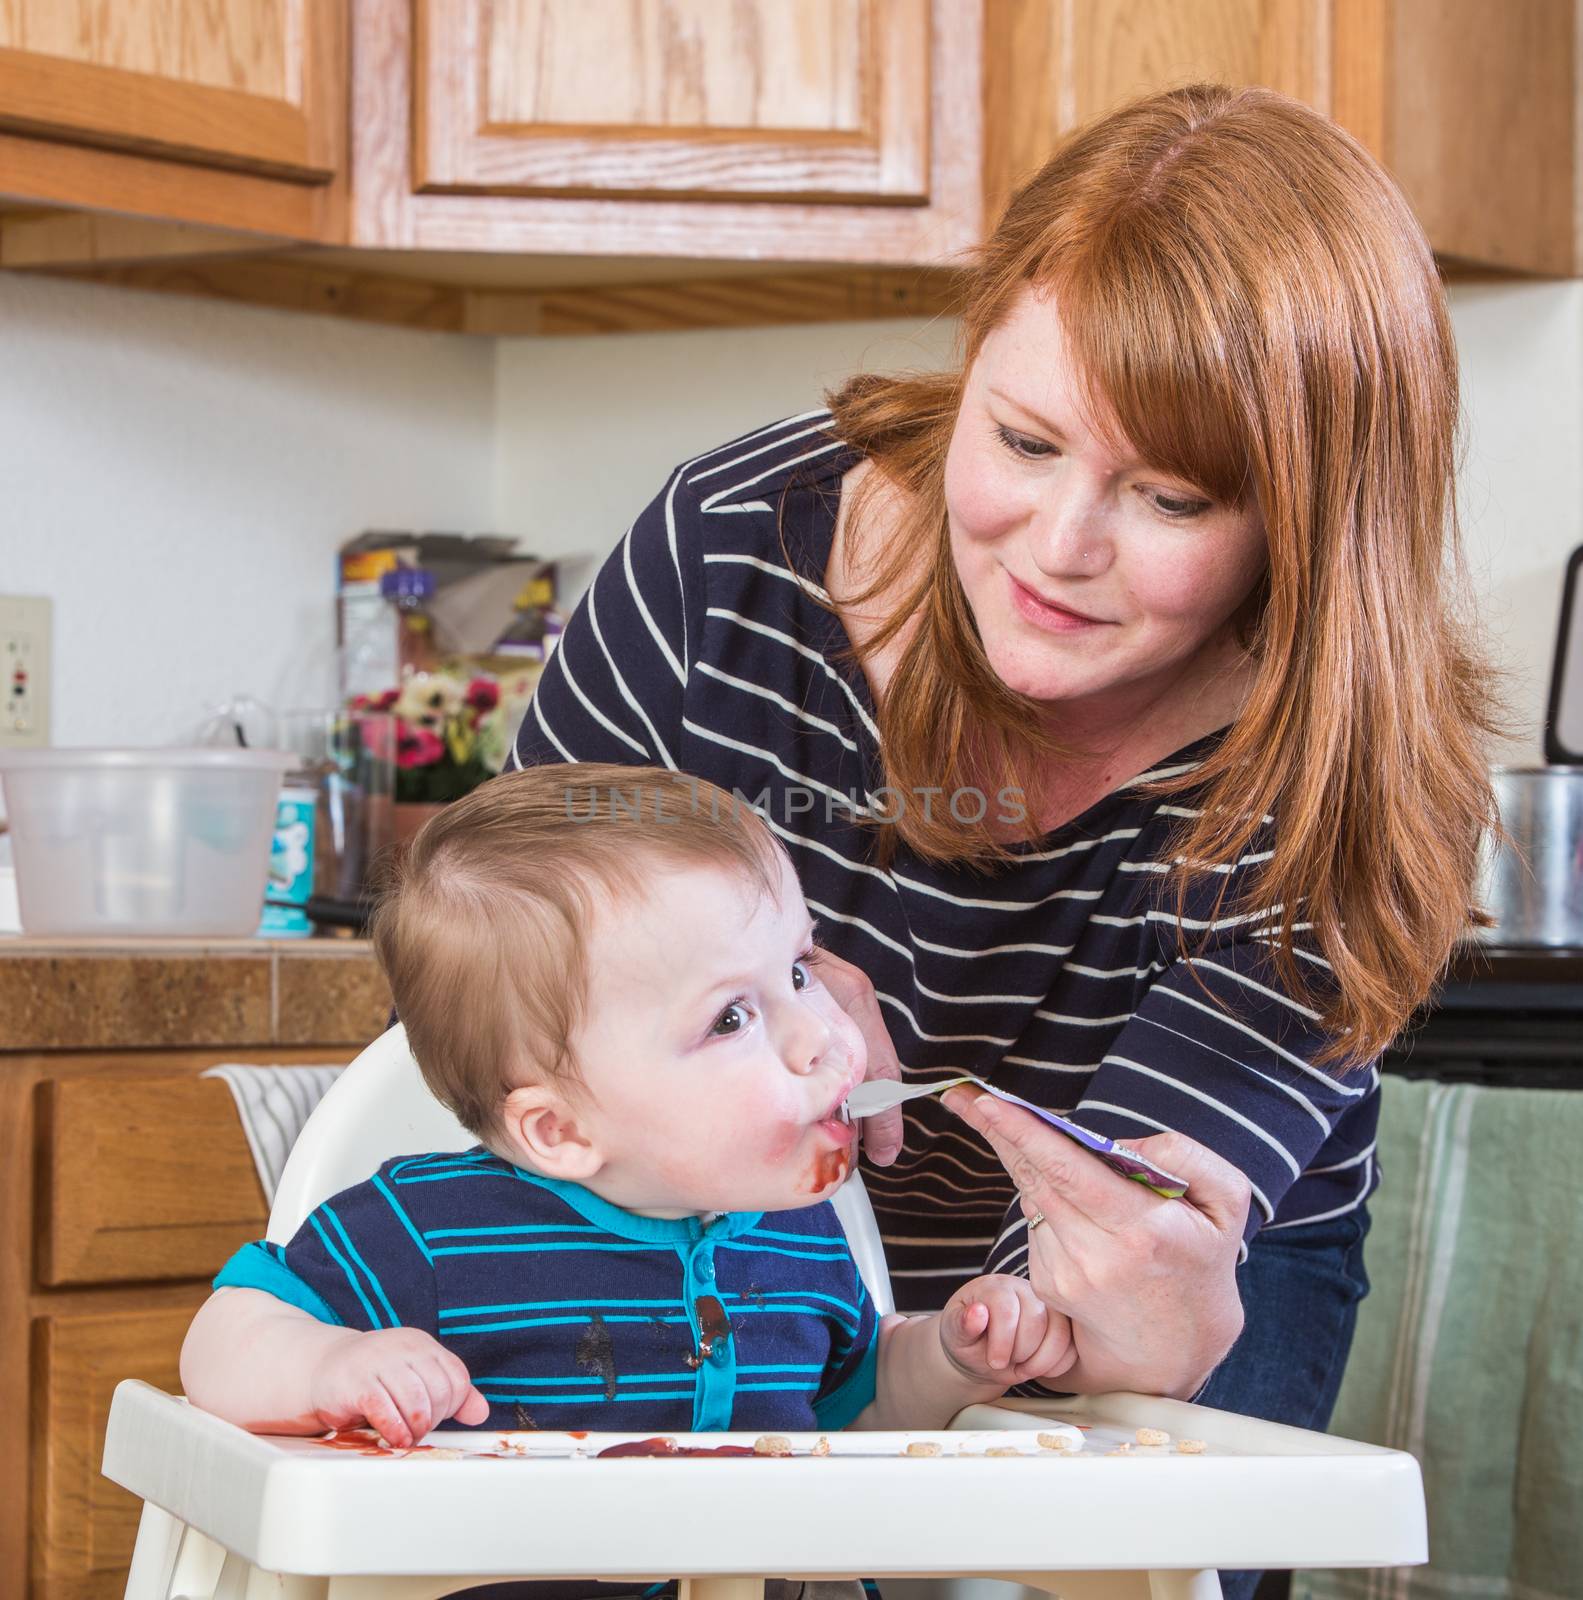 A woman feeds her baby juice in the kitchen